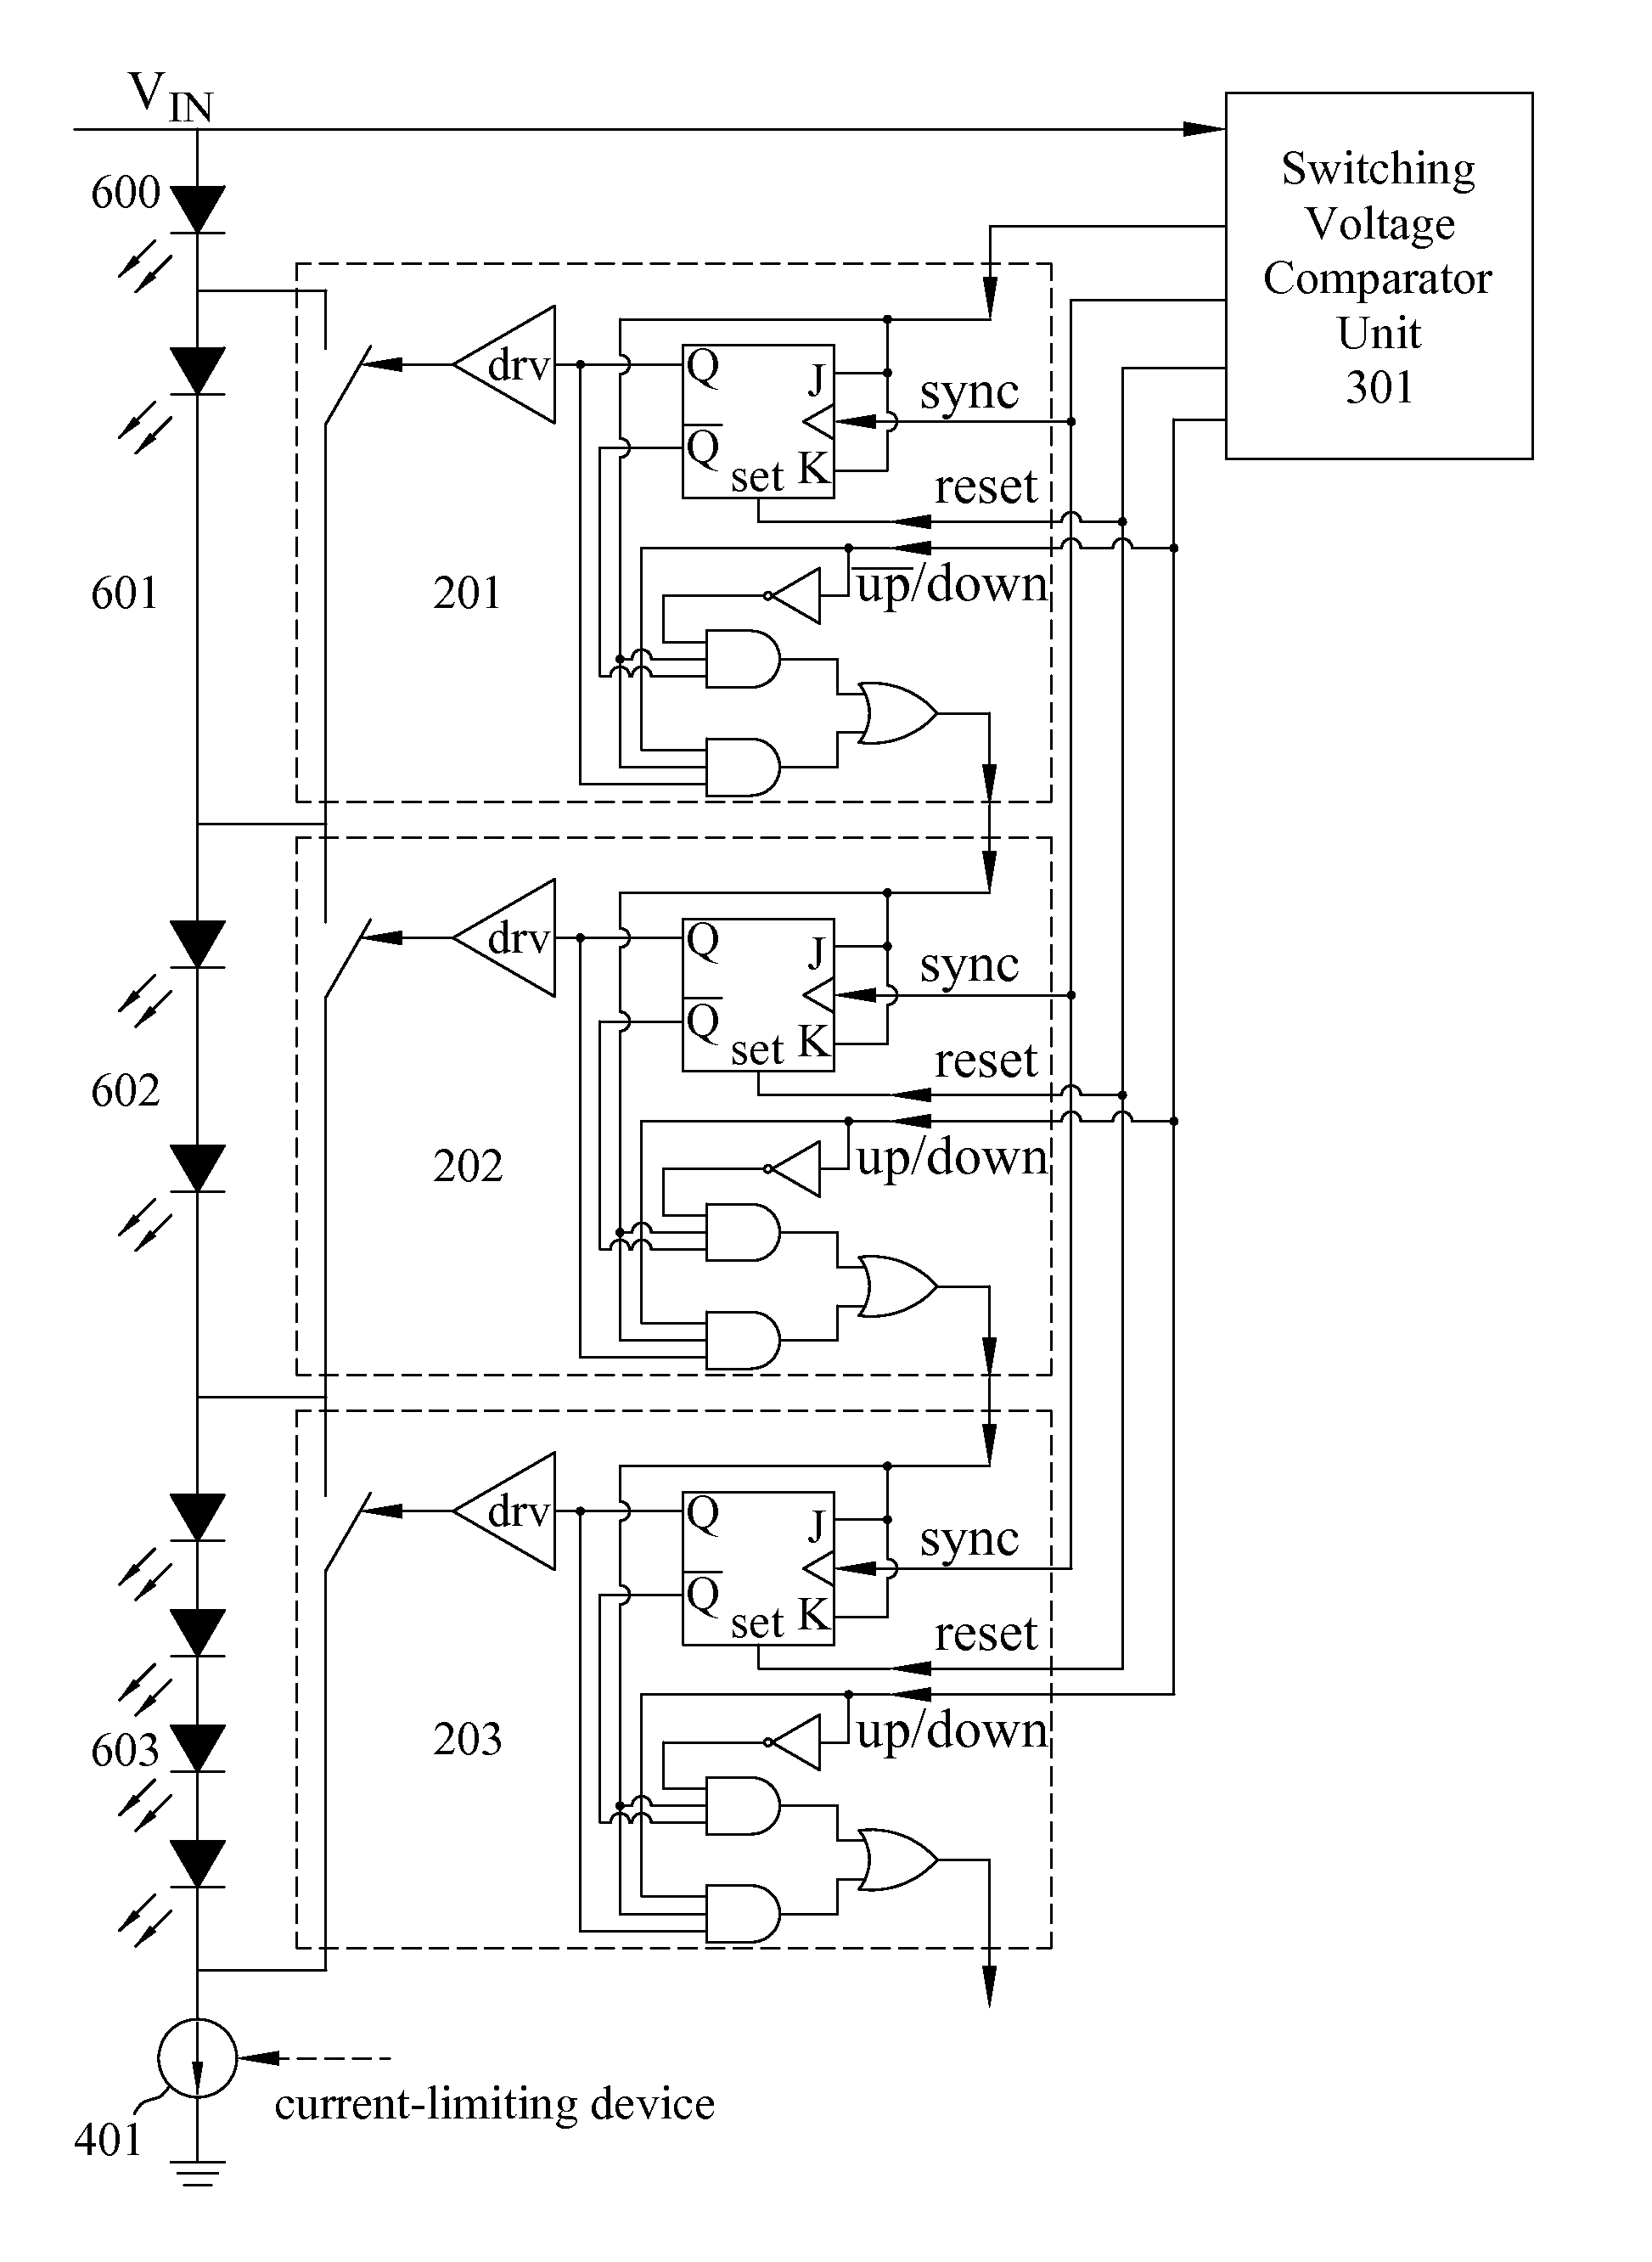 Apparatus for driving a plurality of segments of LED-based lighting units